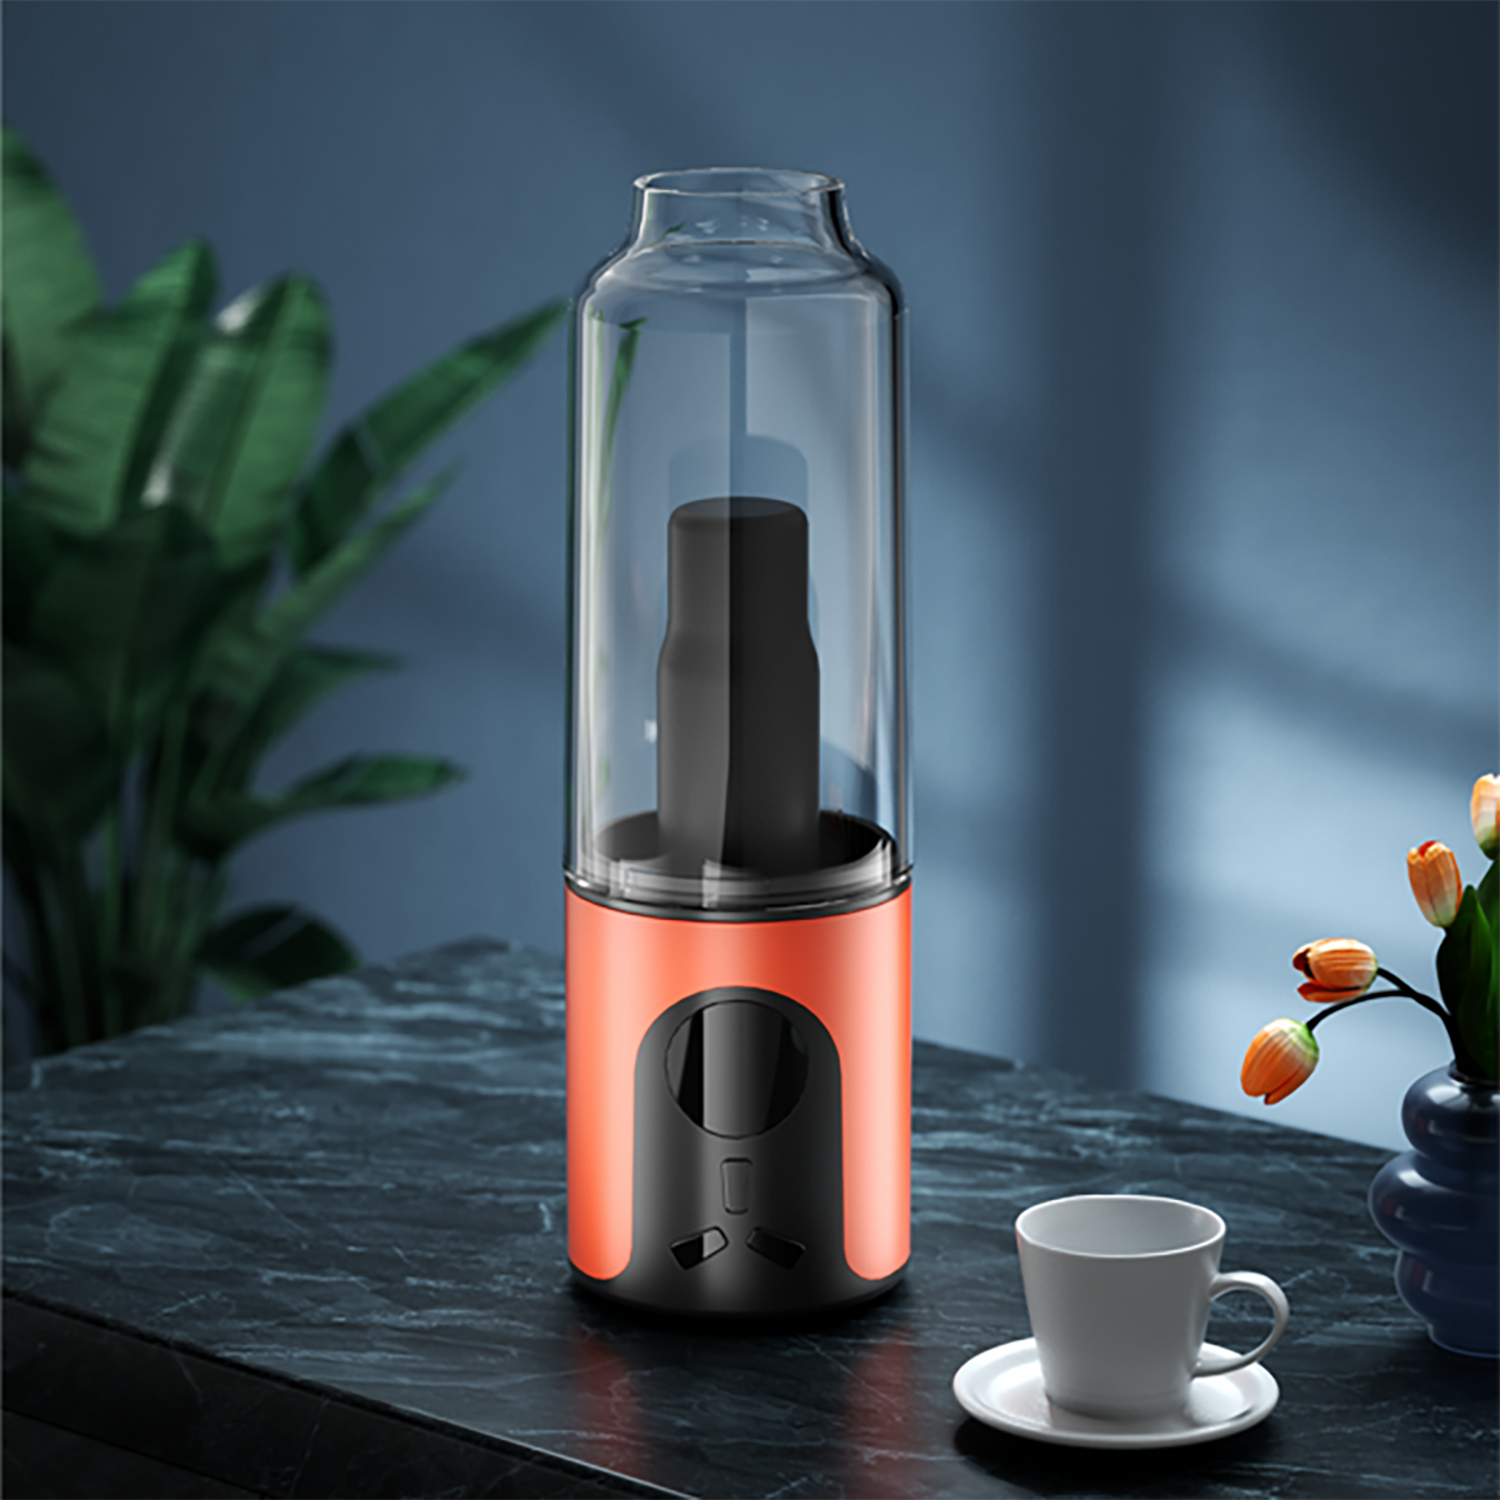 Introducing the PuffShot Wax C4 Vaporizer Cup - Elevate Your Vaping Experience